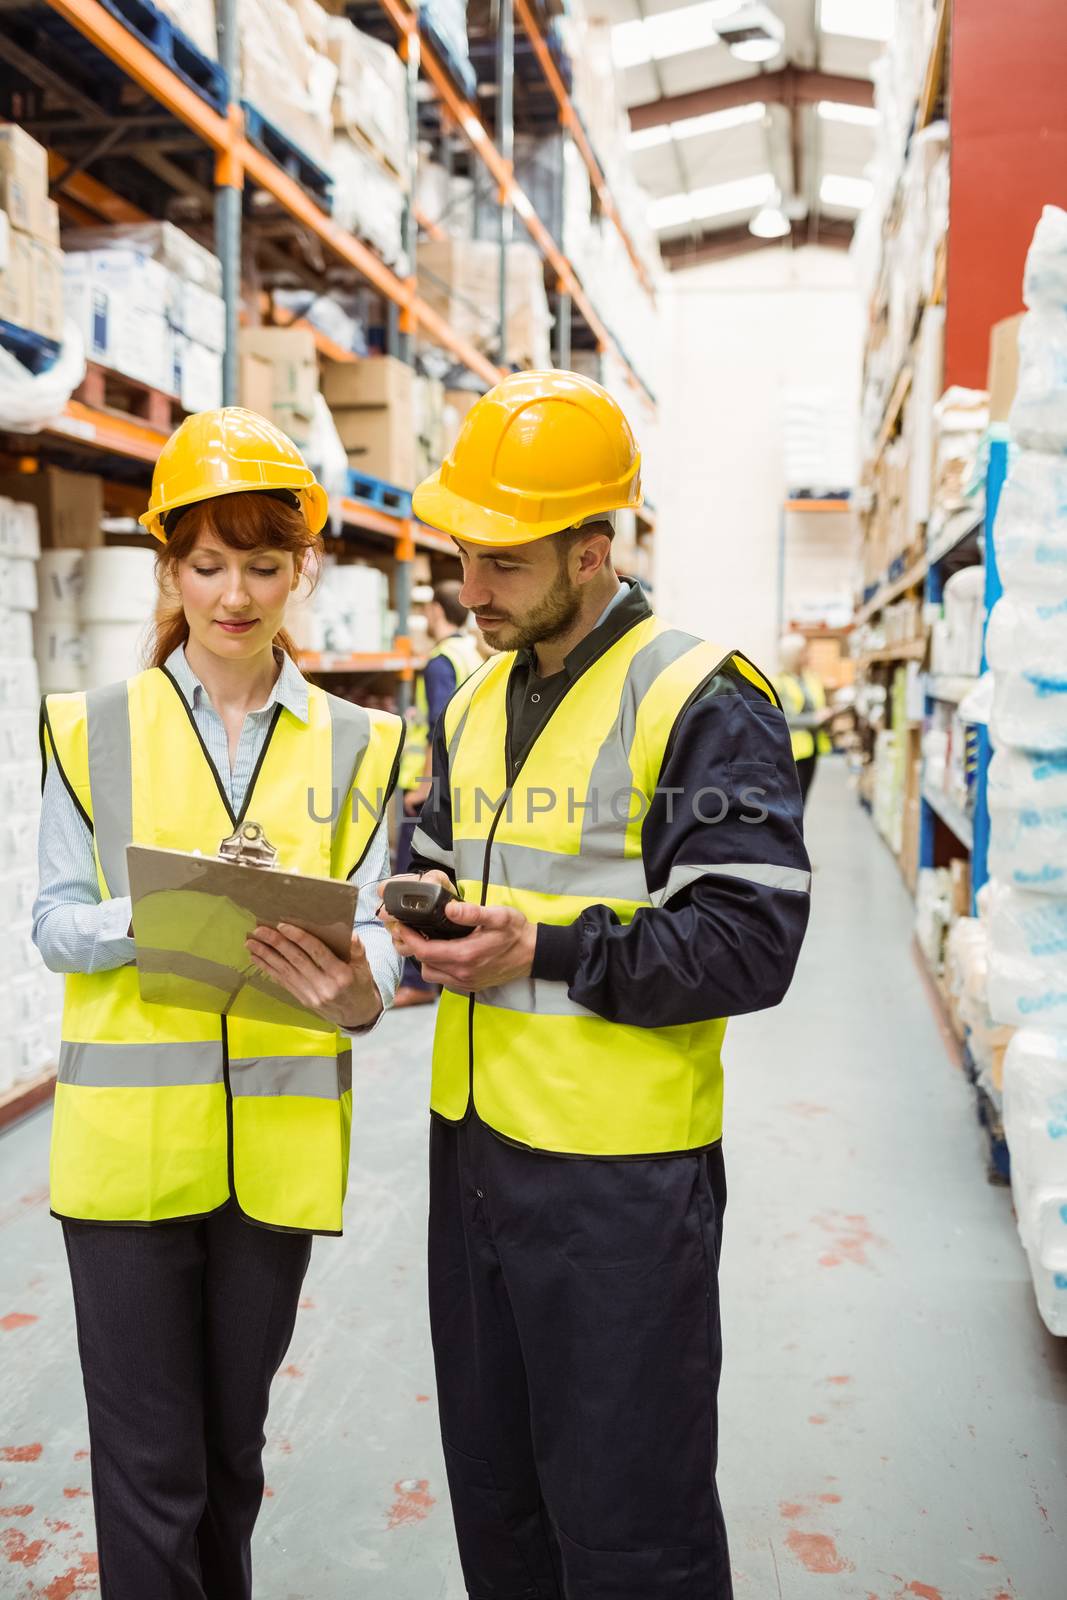 Warehouse manager talking with worker by Wavebreakmedia